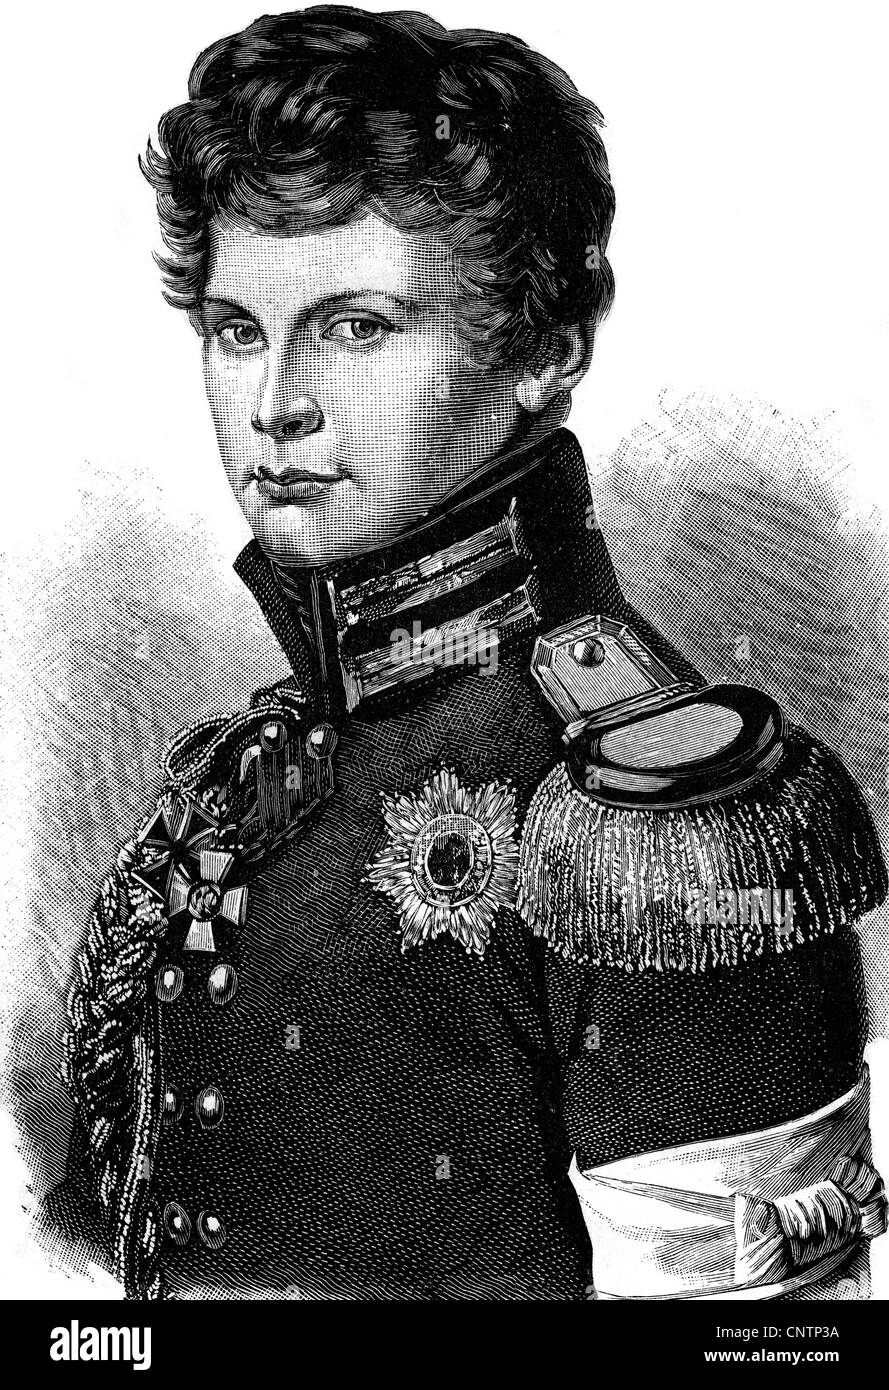 William I, 22.3.1797 - 9.3.1888, German Emperor 18.1.1871 - 9.3.1888, King of Prussia 2.1.1861 - 9.3.1888, with 17 years, 1814, portrait, wood engraving, 19th century, Stock Photo